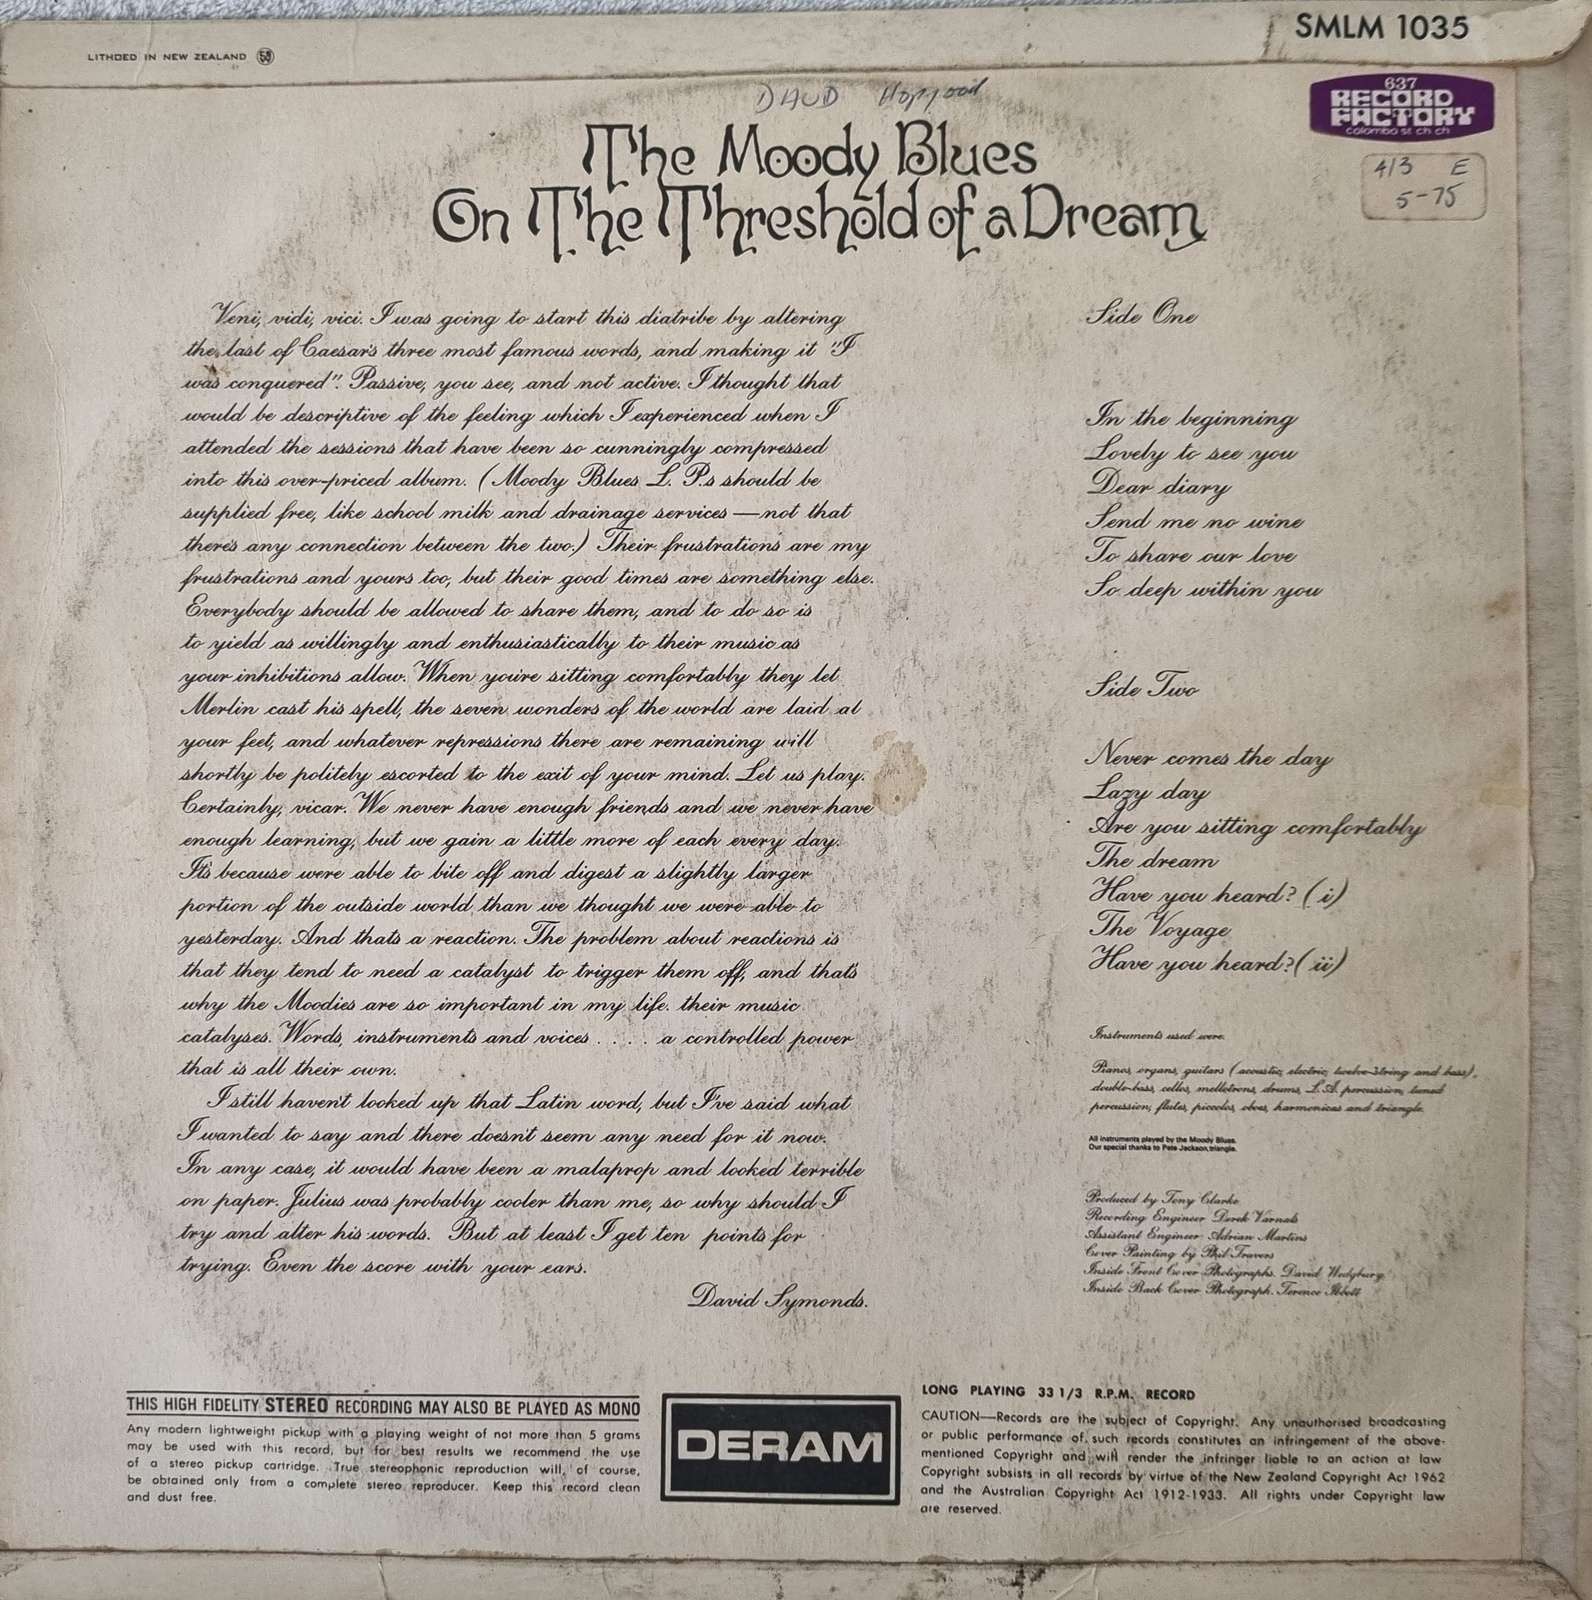 The Moody Blues - On the Threshold of a Dream (LP)